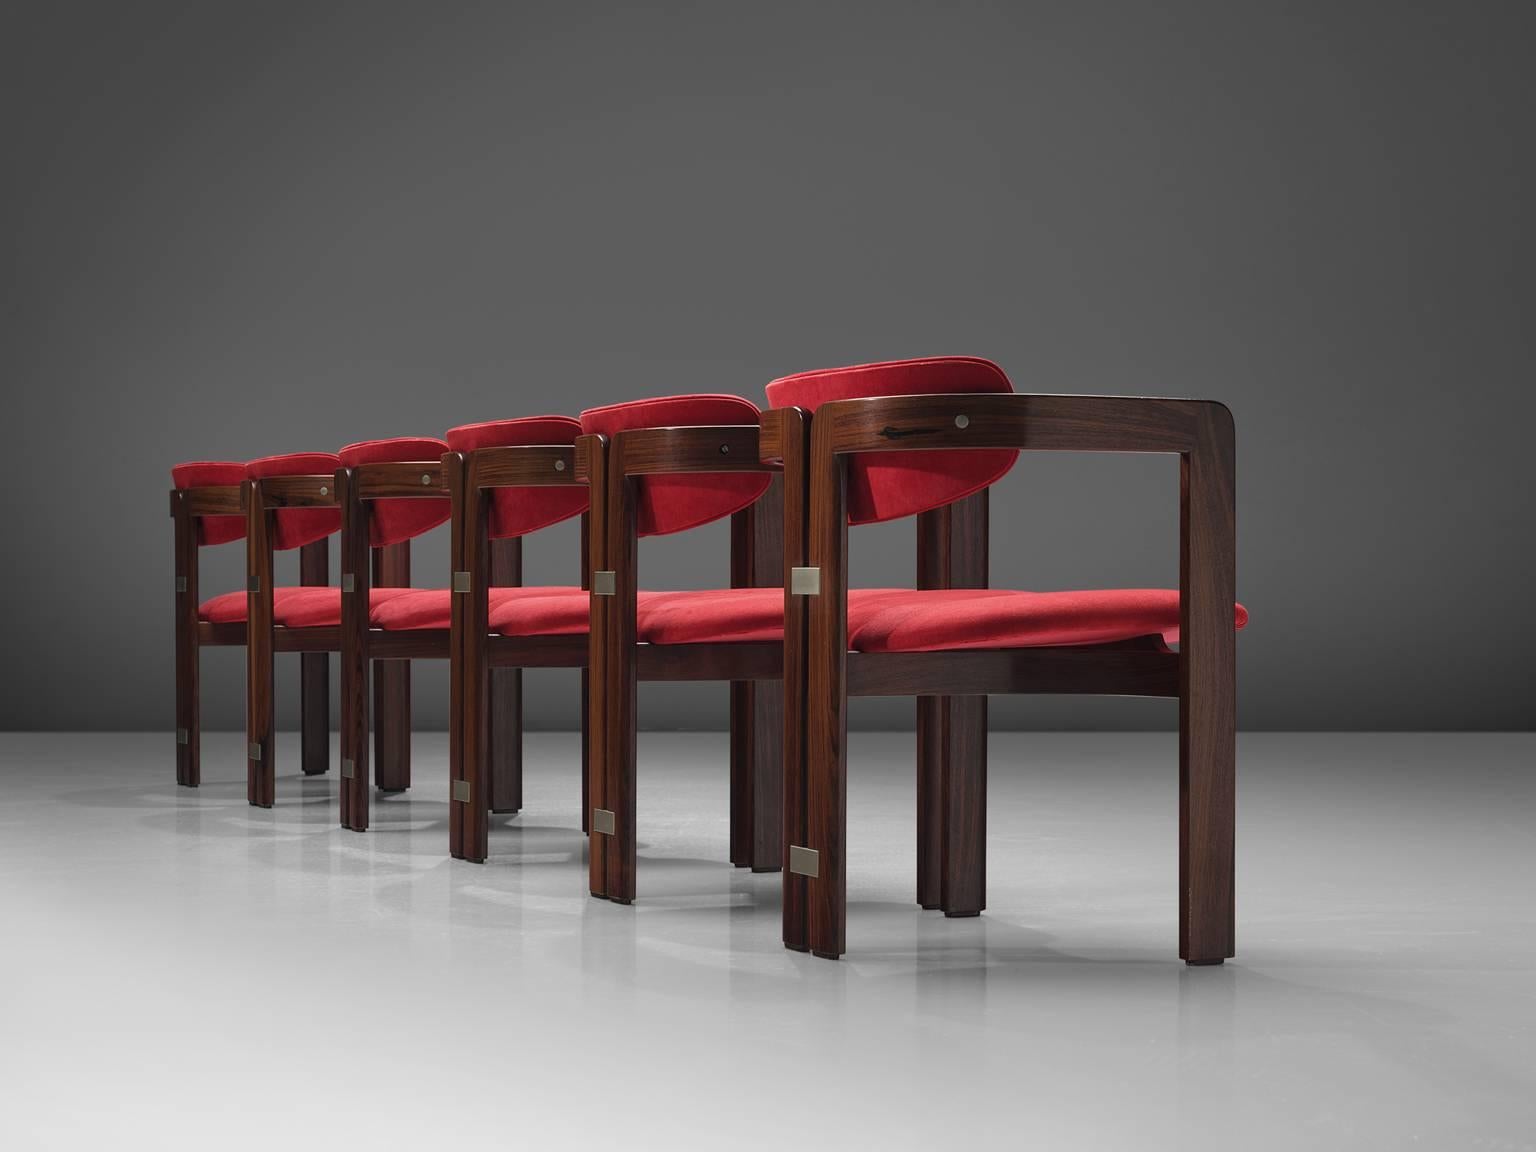 Augusto Savini, set of six 'Pamplona' dining room chairs, in rosewood and red suede, by for Pozzi, Italy, 1965. 

Set of six armchairs in rosewood and red suede upholstery. A characteristic design; simplistic yet very strong in lines and